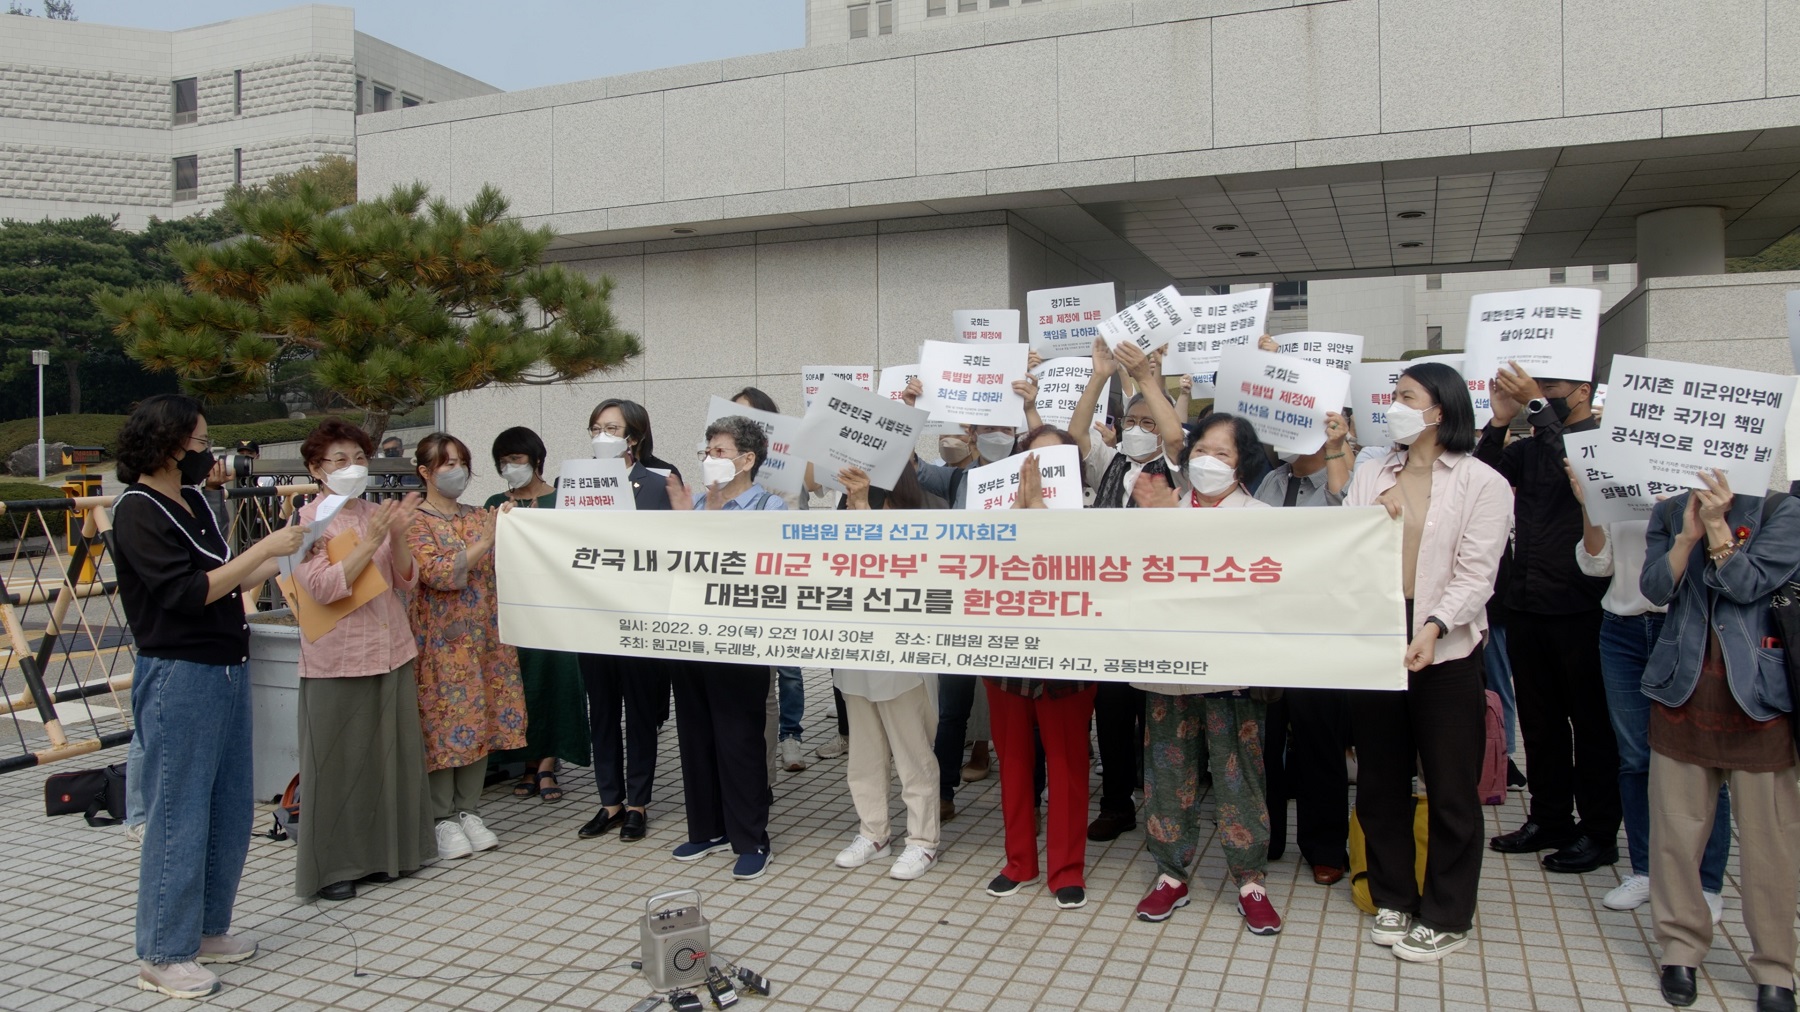 On September 29, a press conference was held in front of the Supreme Court’s main gate to celebrate the court’s ruling on the compensation lawsuit filed by the “Comfort Women” for U.S. troops against the state. ⓒ Gowoon Lee